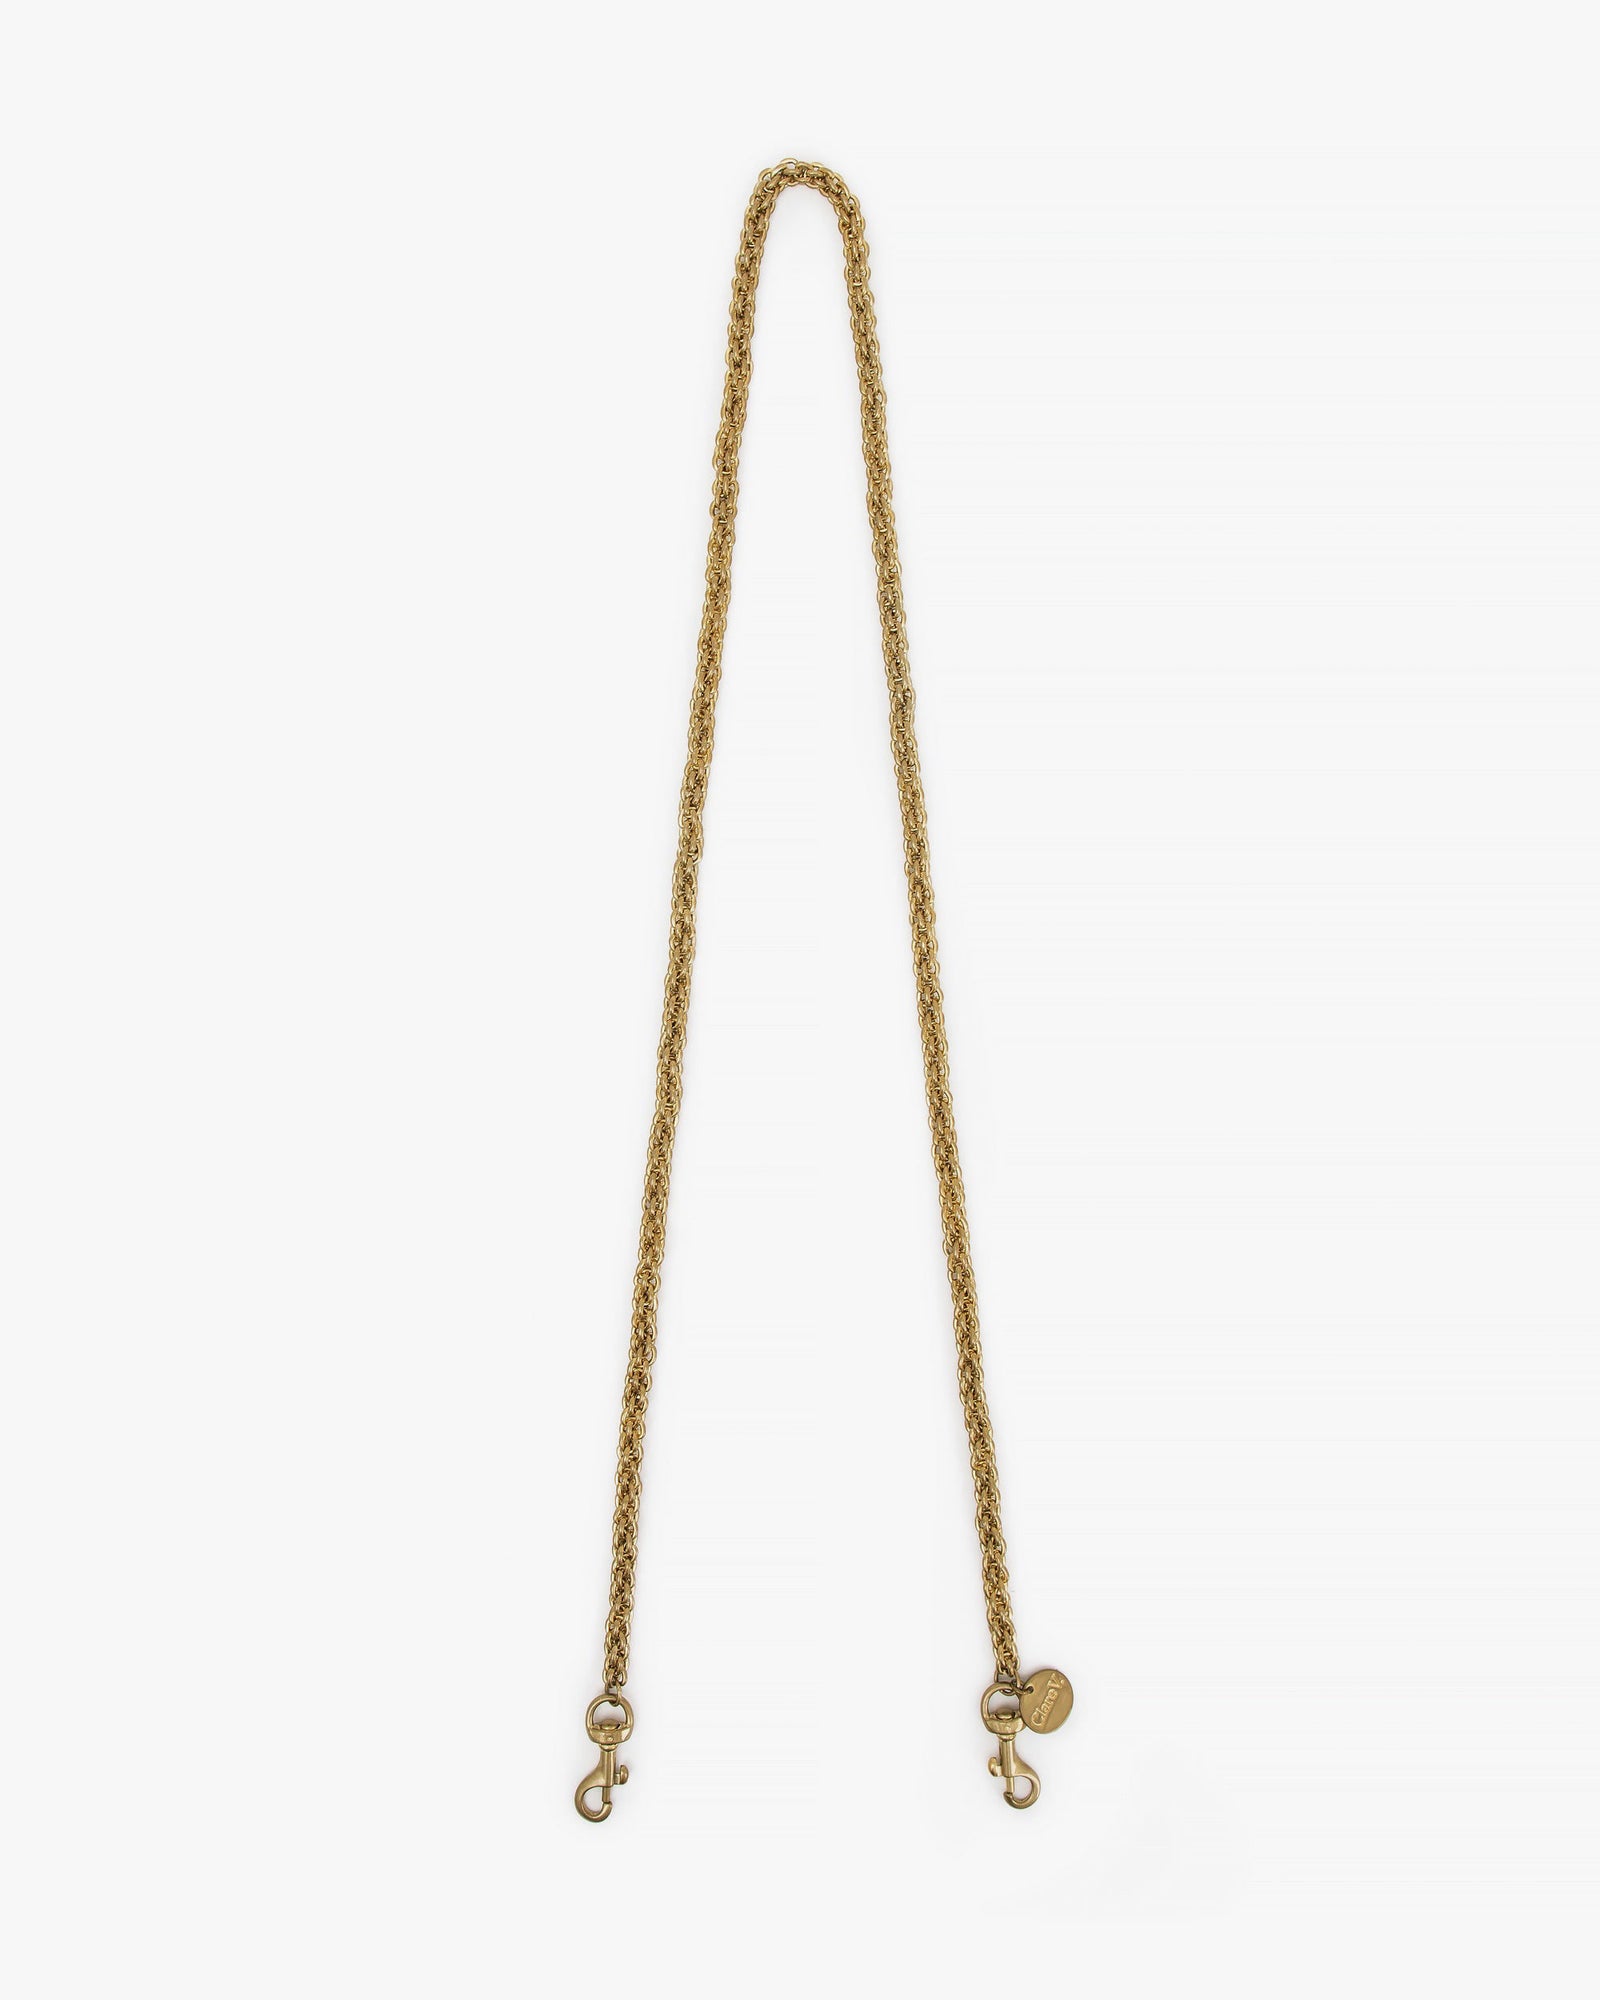 Clare V, Bags, Clare V Chain Crossbody Strap Brass Thick Just The Strap  No Purse Included